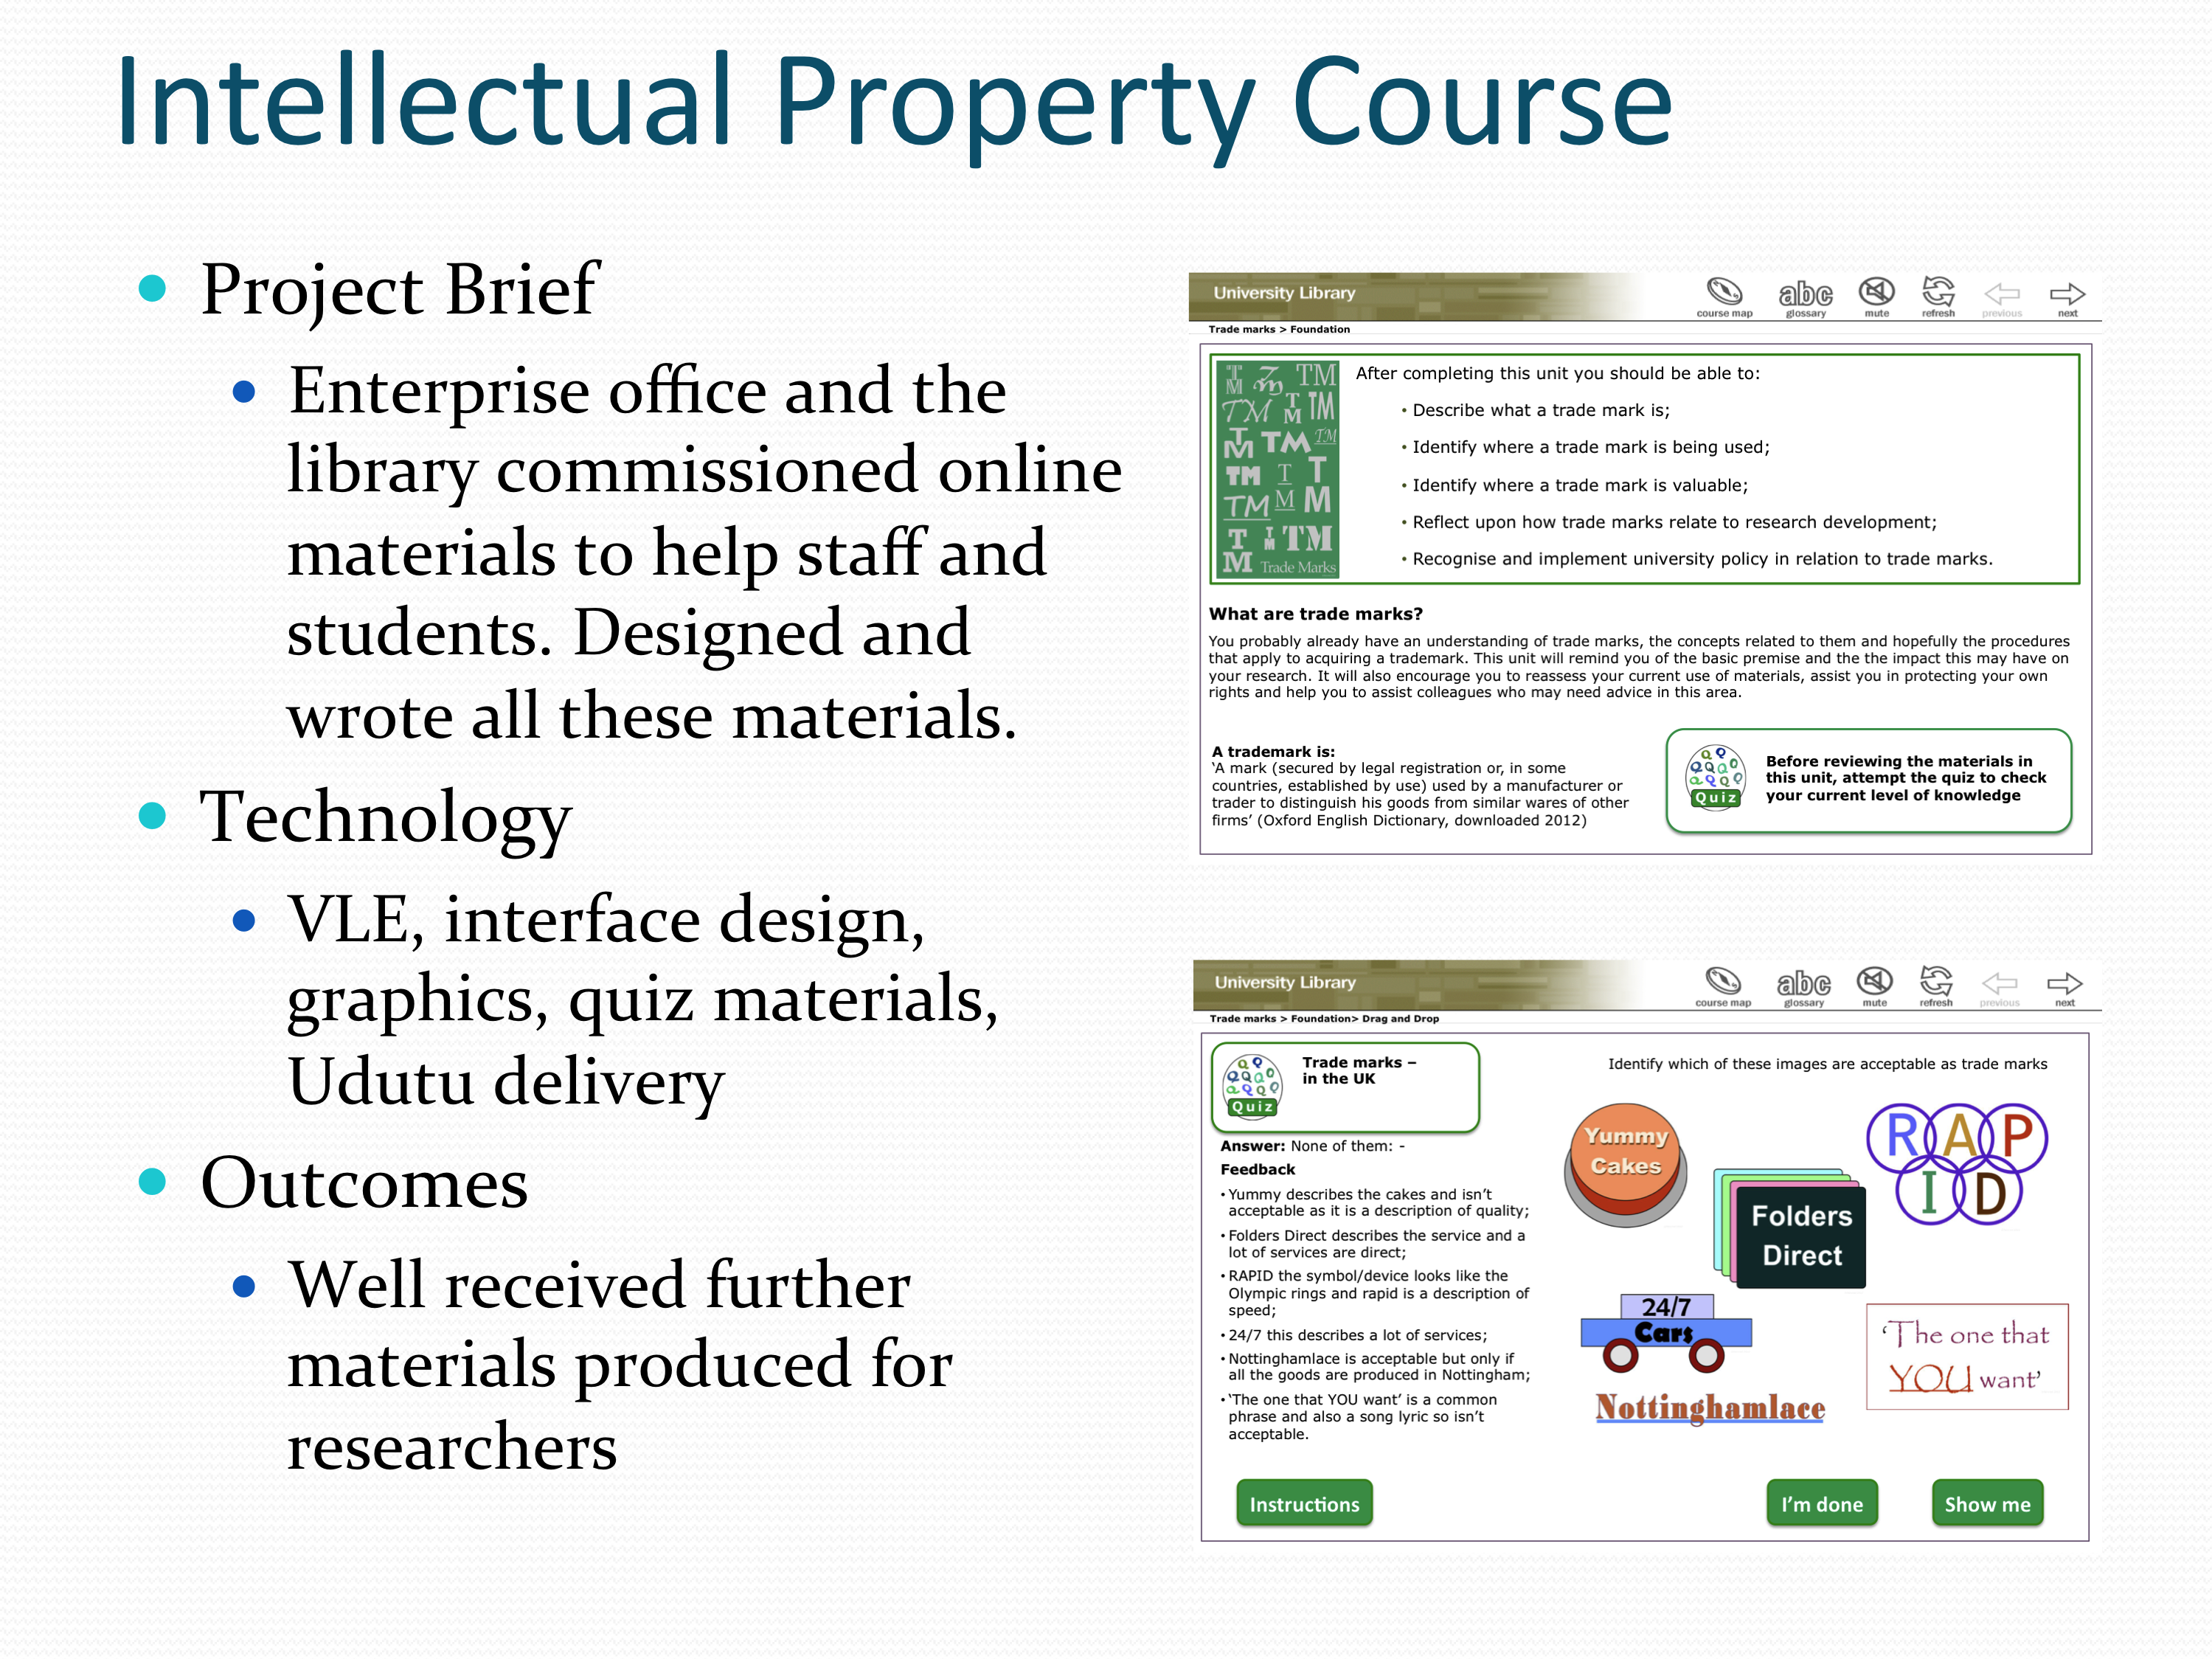 Intellectual property course